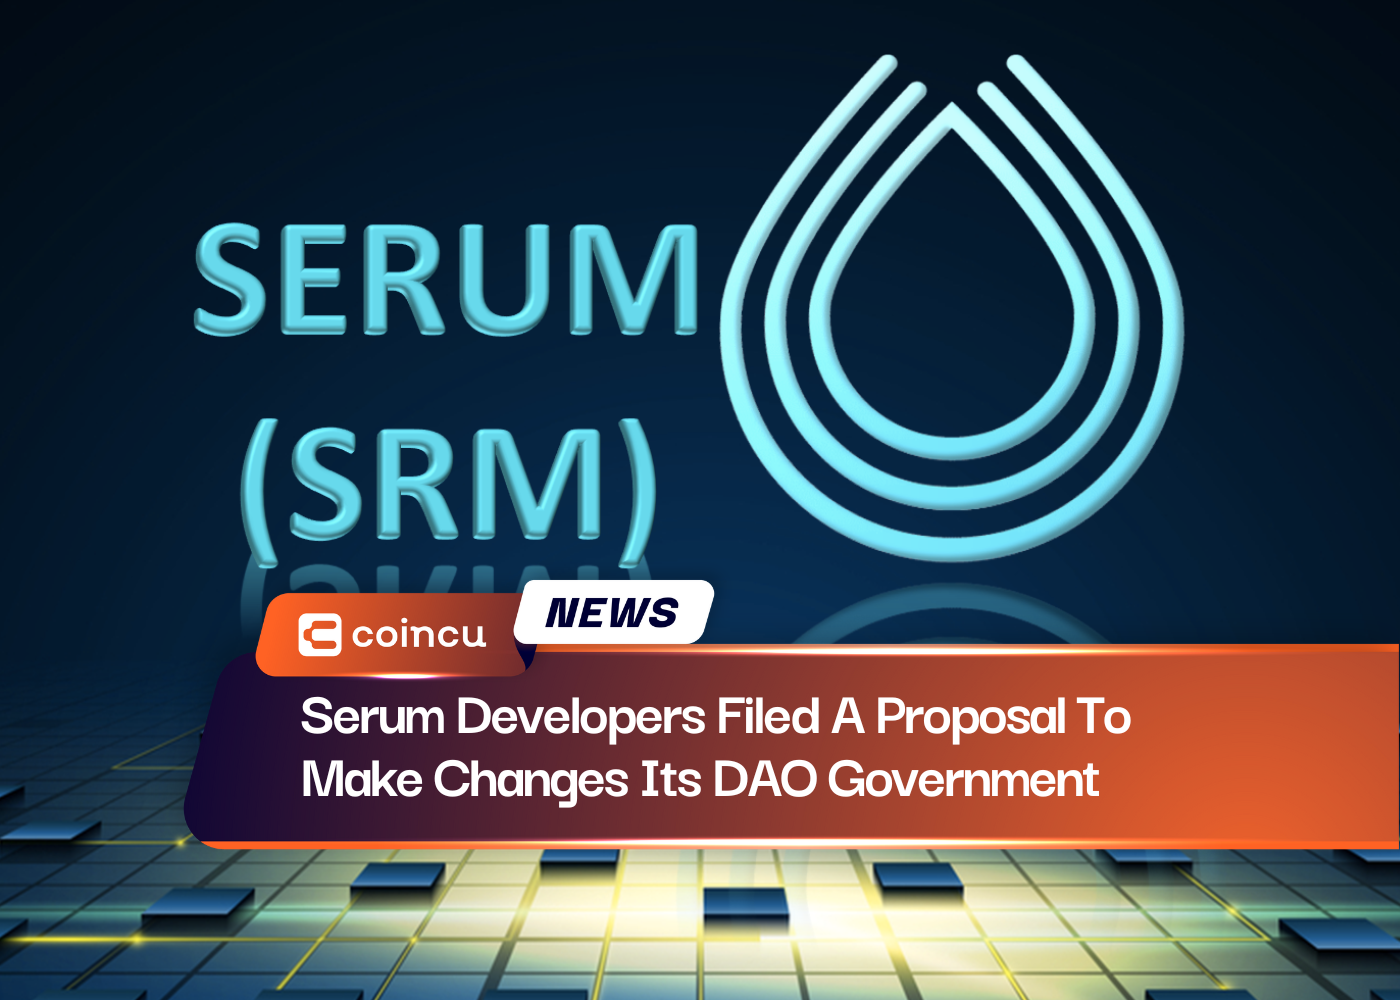 Serum Developers Filed A Proposal To Make Changes Its DAO Government